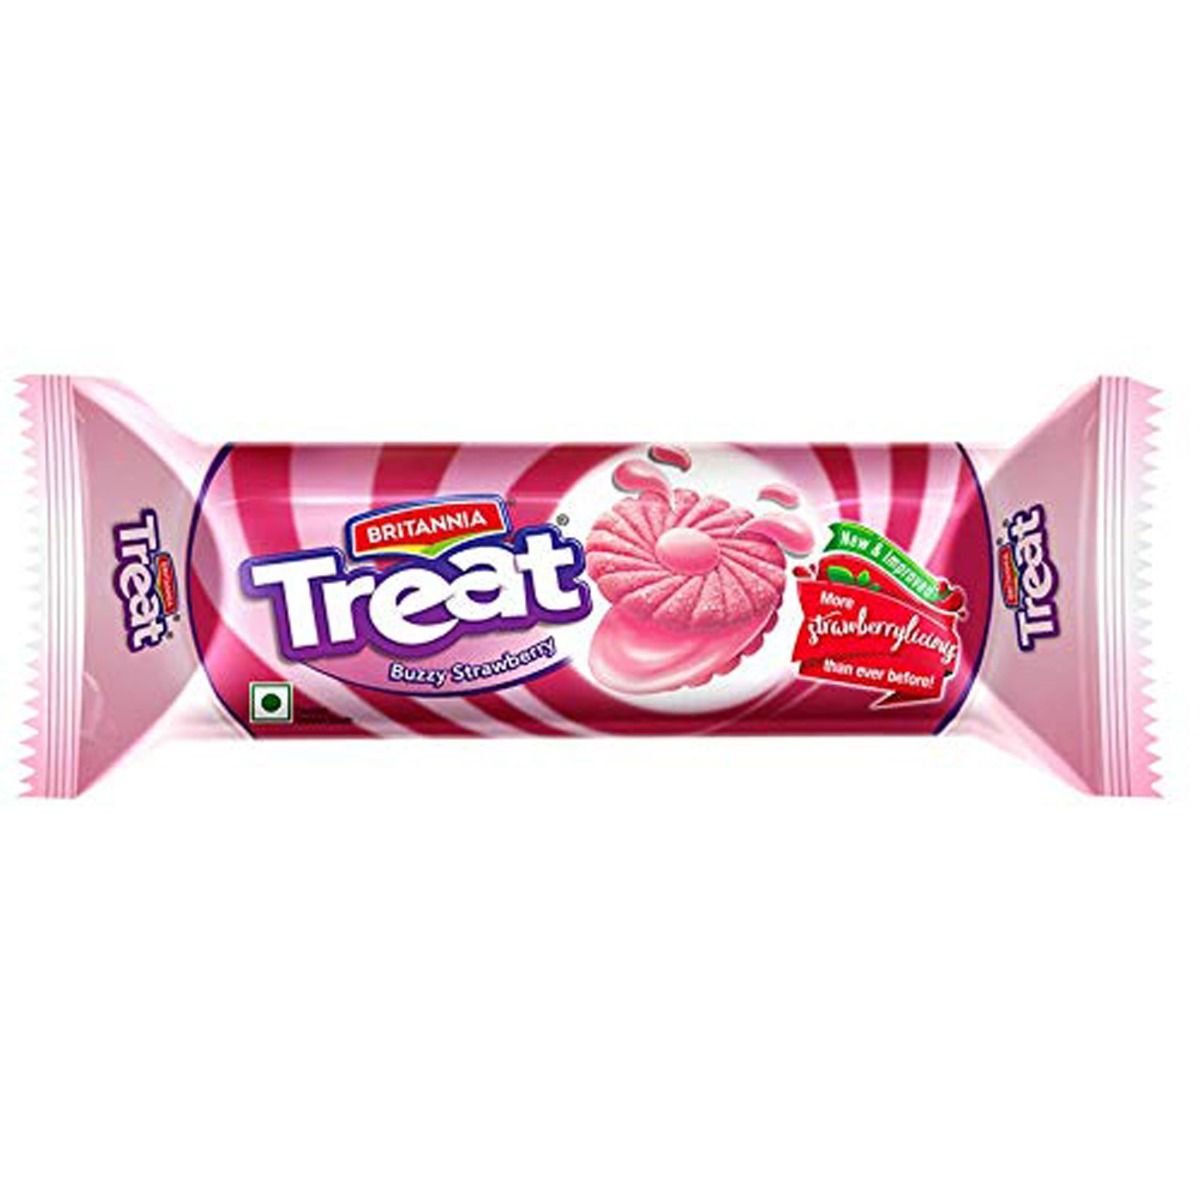 Britannia Treat Buzzy Strawberry Biscuits, 1 Count, Pack of 1 